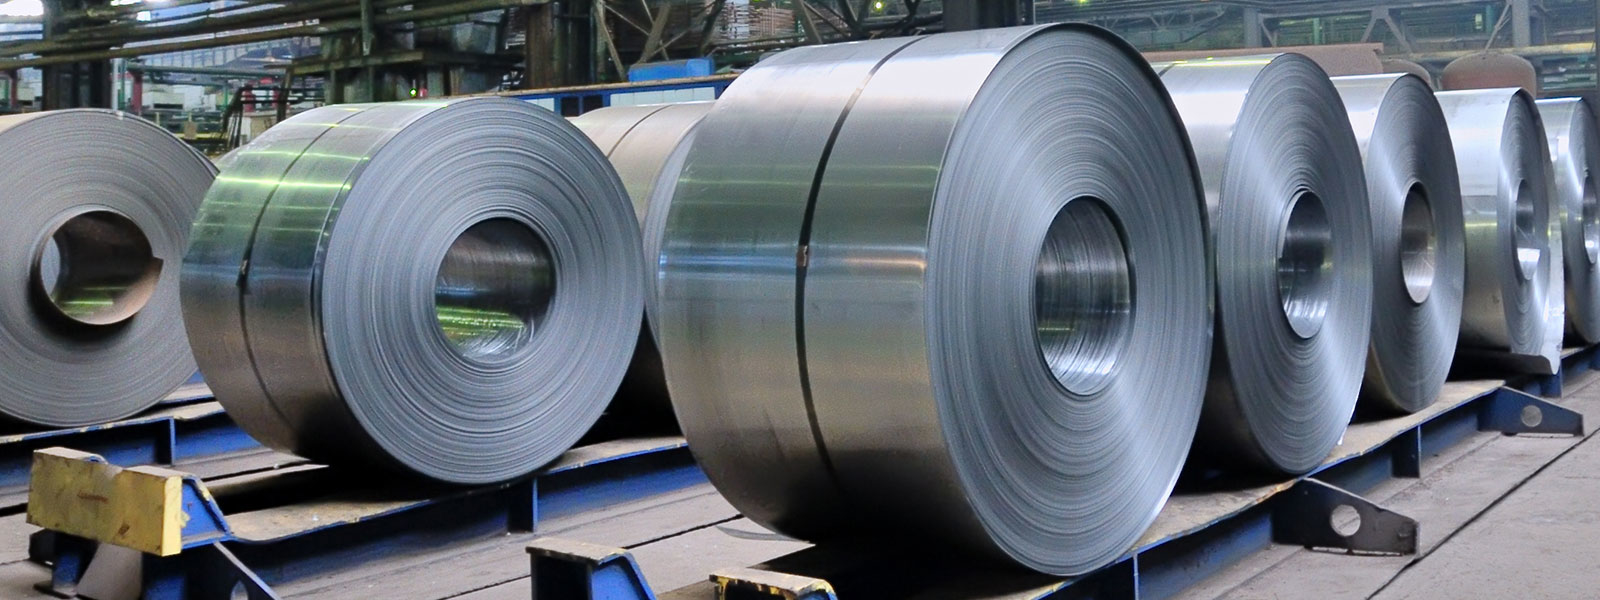 What is green steel?